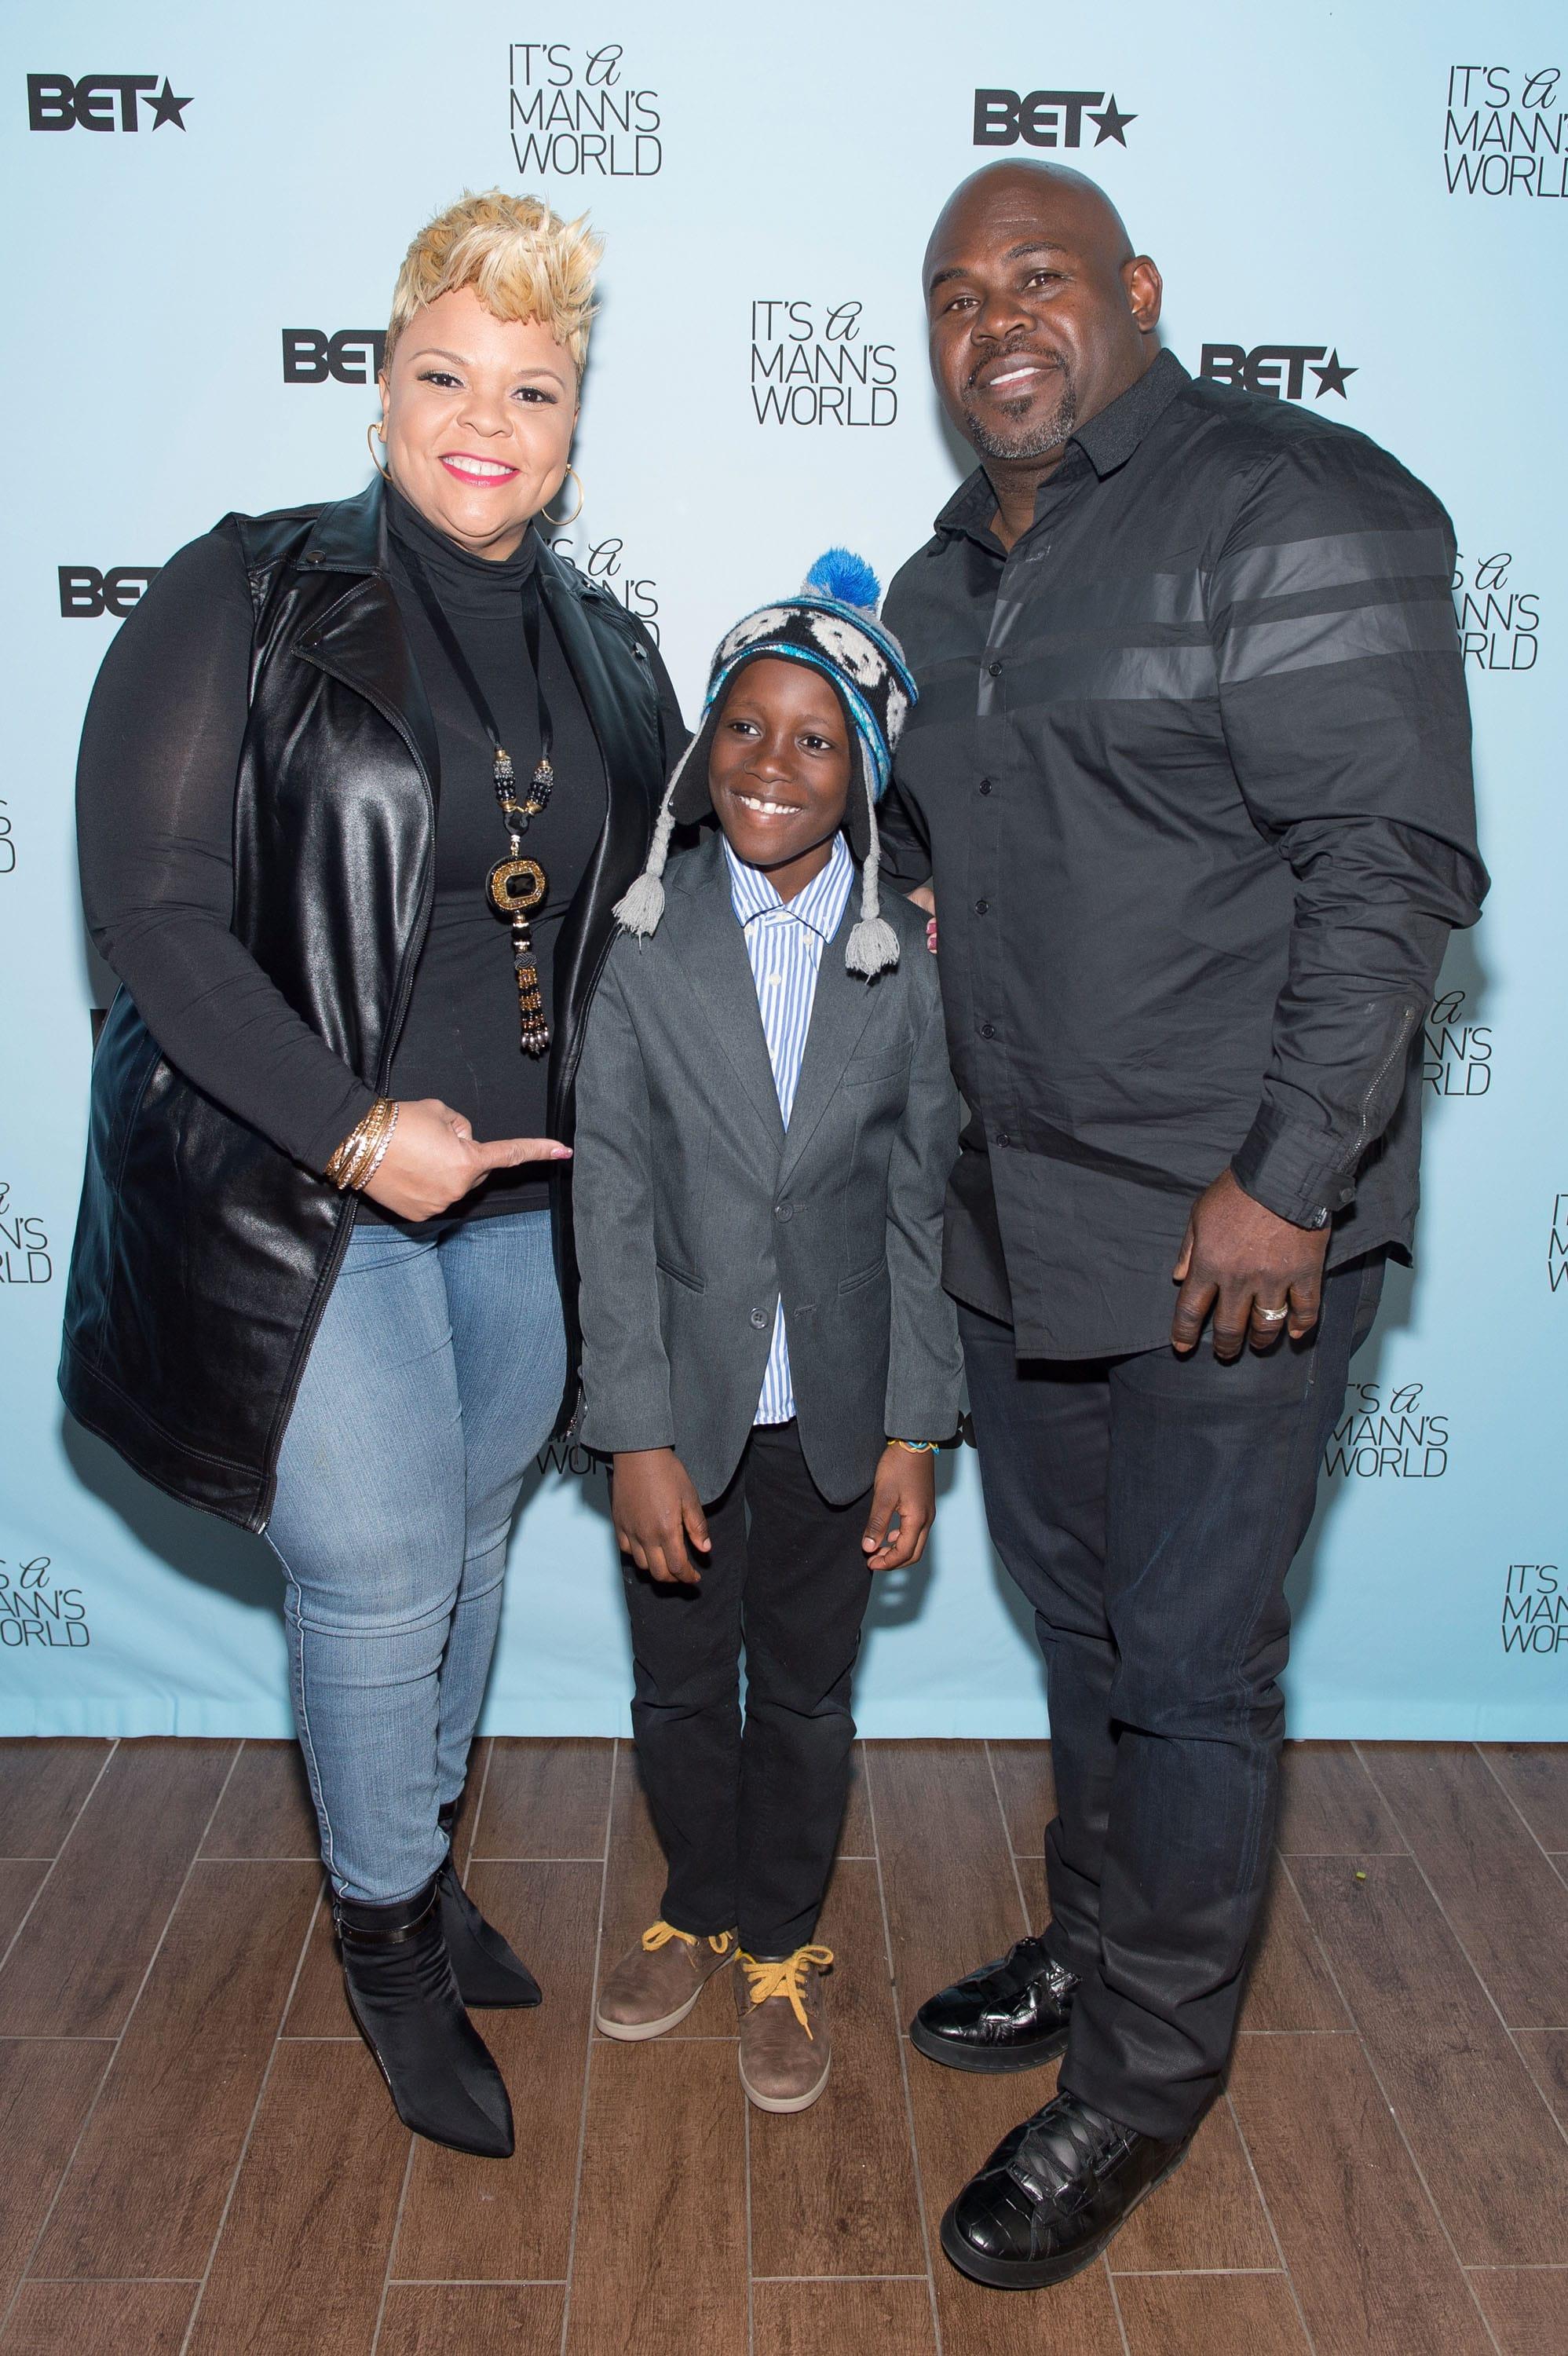 ATLANTA, GEORGIA - FEBRUARY 16: Singer and actress Tamela Mann, Dele Tinuoye, and actor David Mann attend 'It's a Mann's World' season two luncheon screening at TRACE at the W on February 16, 2016 in Atlanta, Georgia. (Photo by Marcus Ingram/BET/Getty Images for BET)